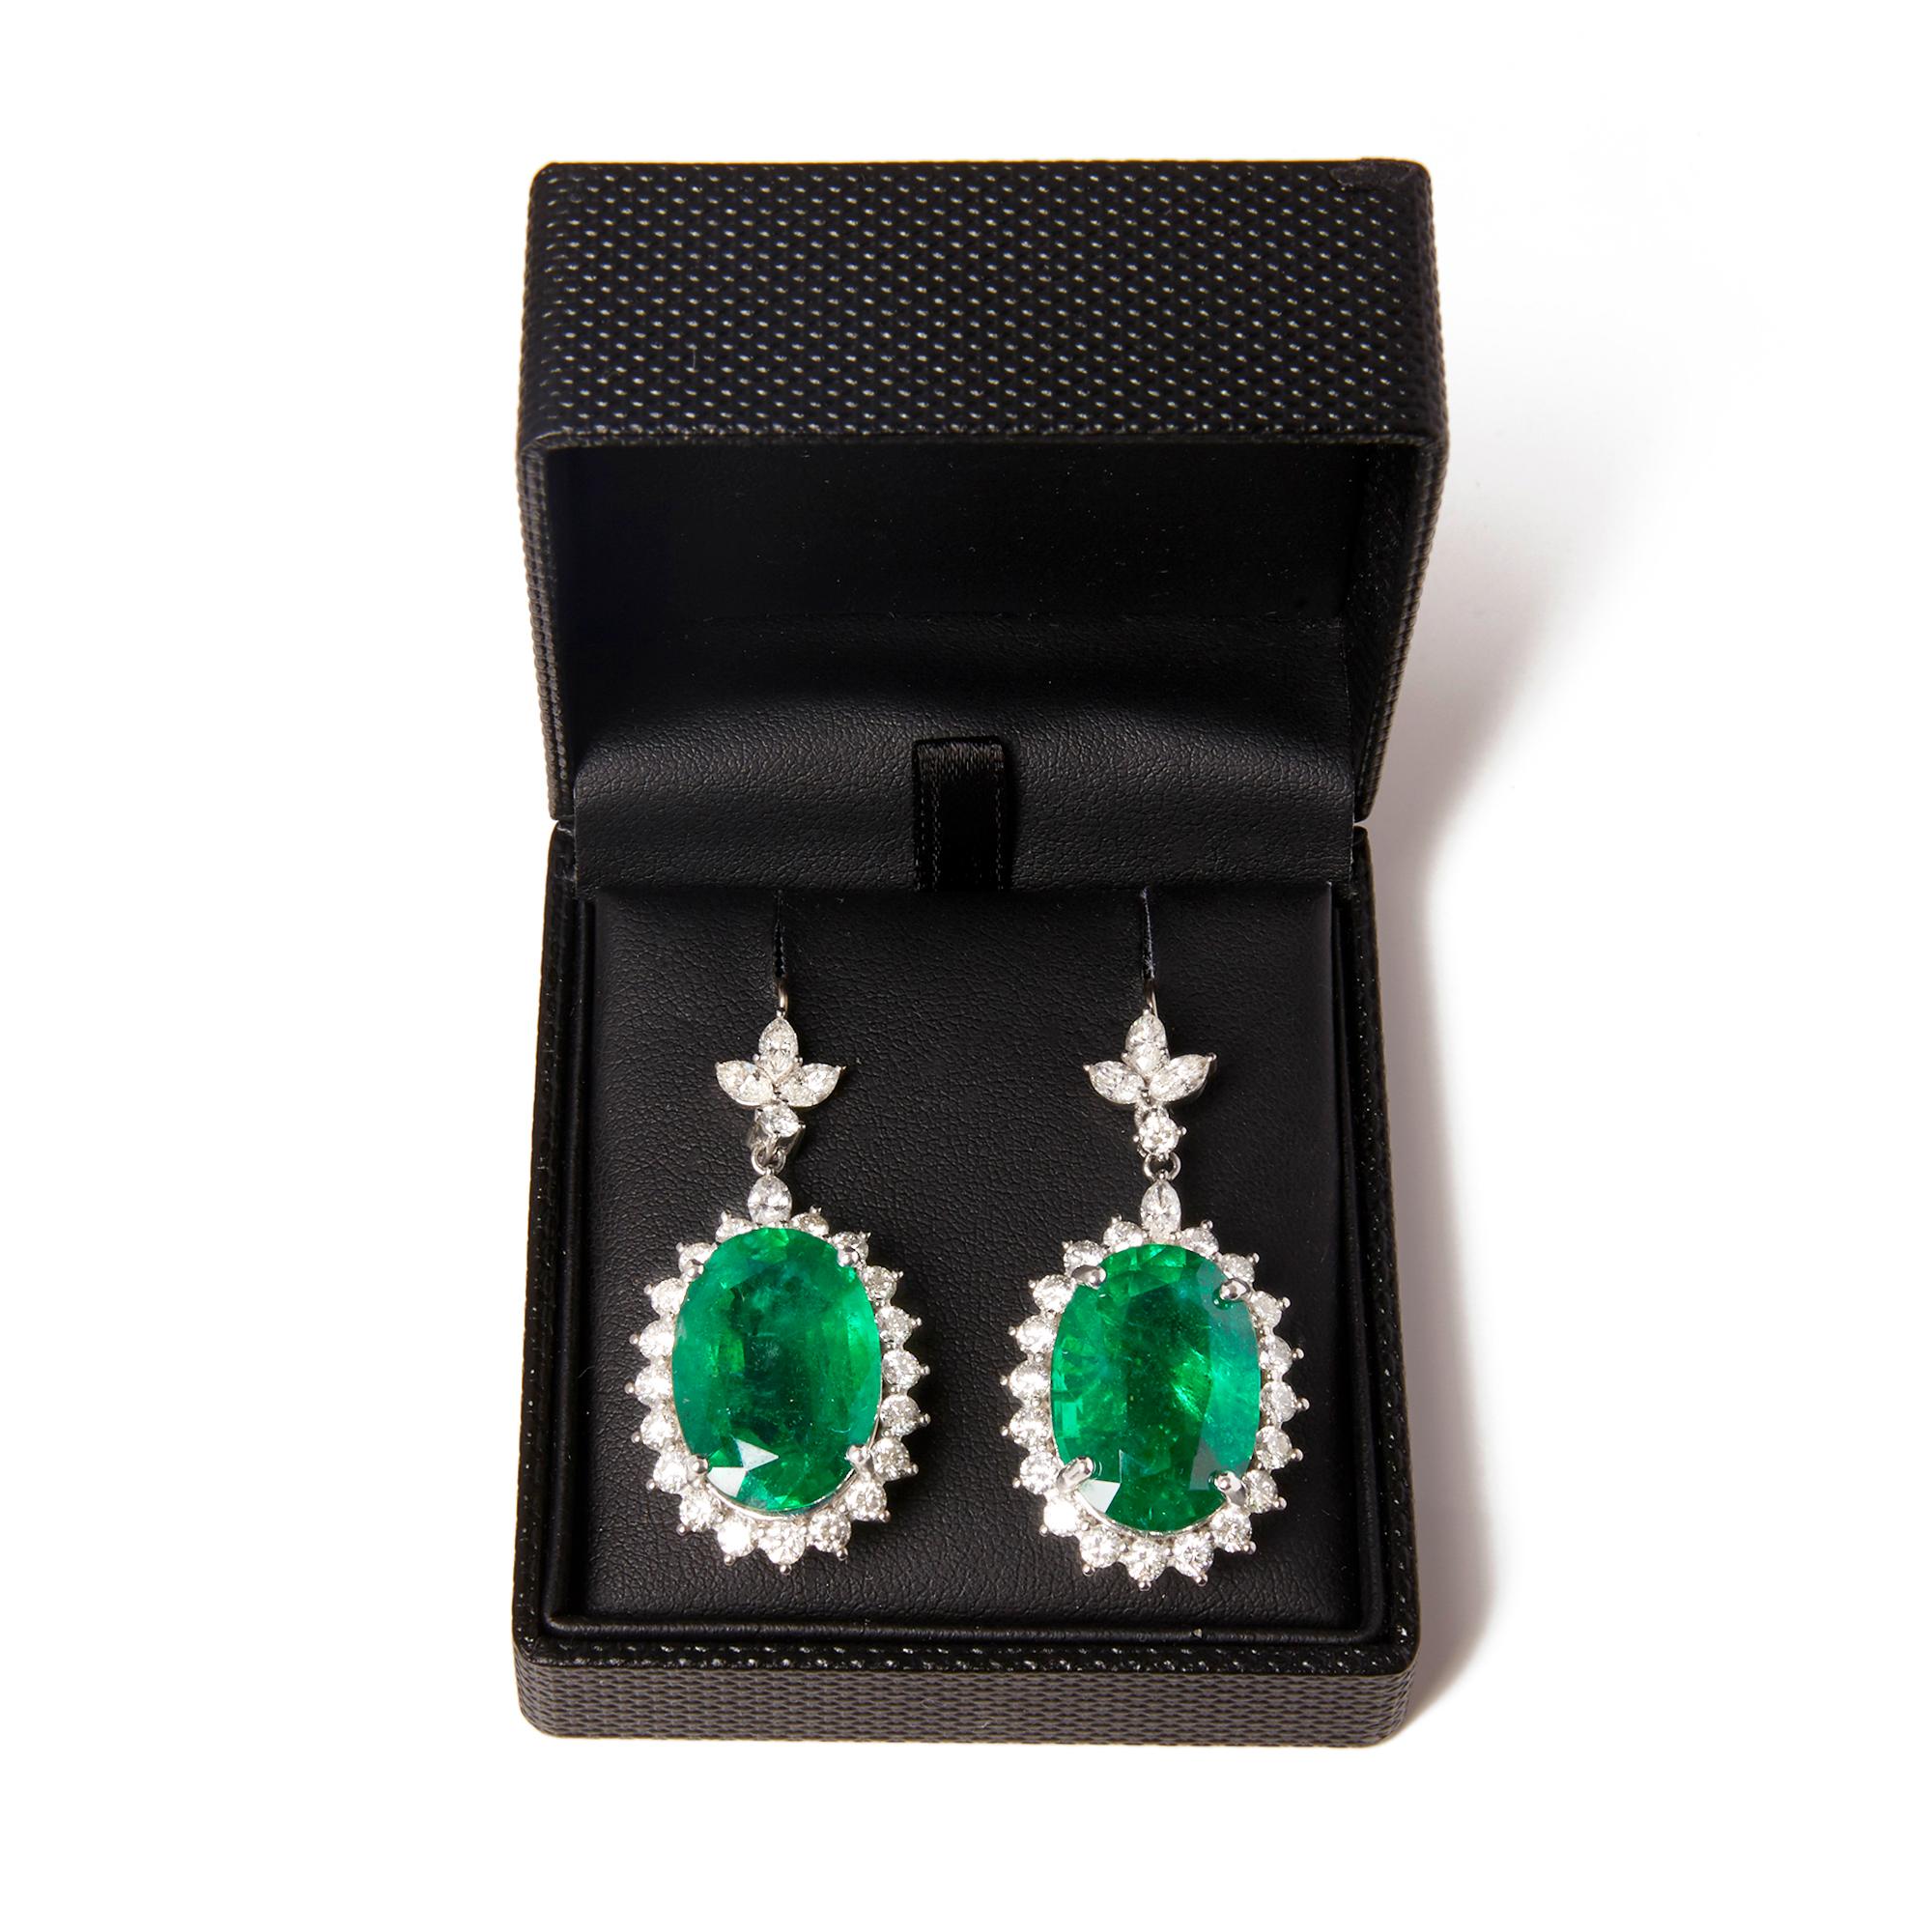 Contemporary David Jerome 18 Karat White Gold Emerald and Diamond Drop Earrings For Sale